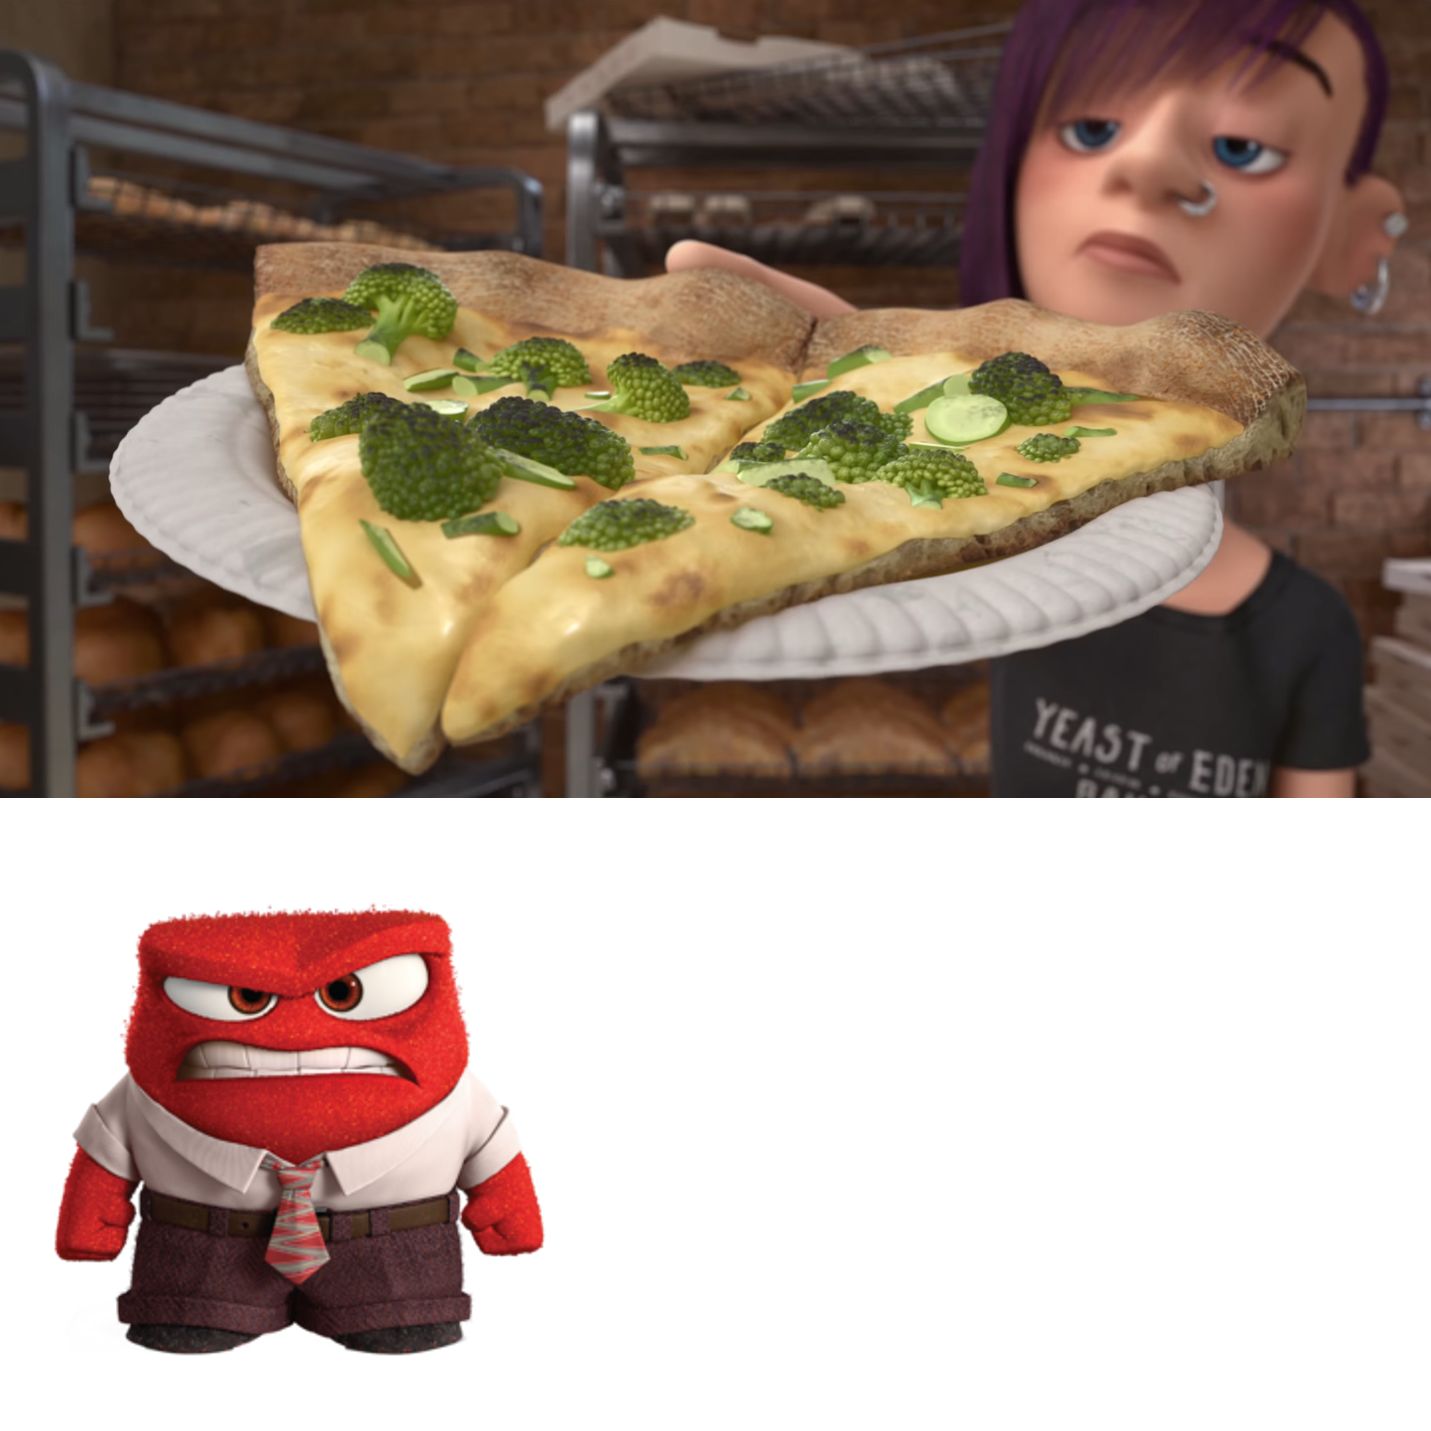 High Quality congratulations you ruined inside out broccoli pizza anger Blank Meme Template